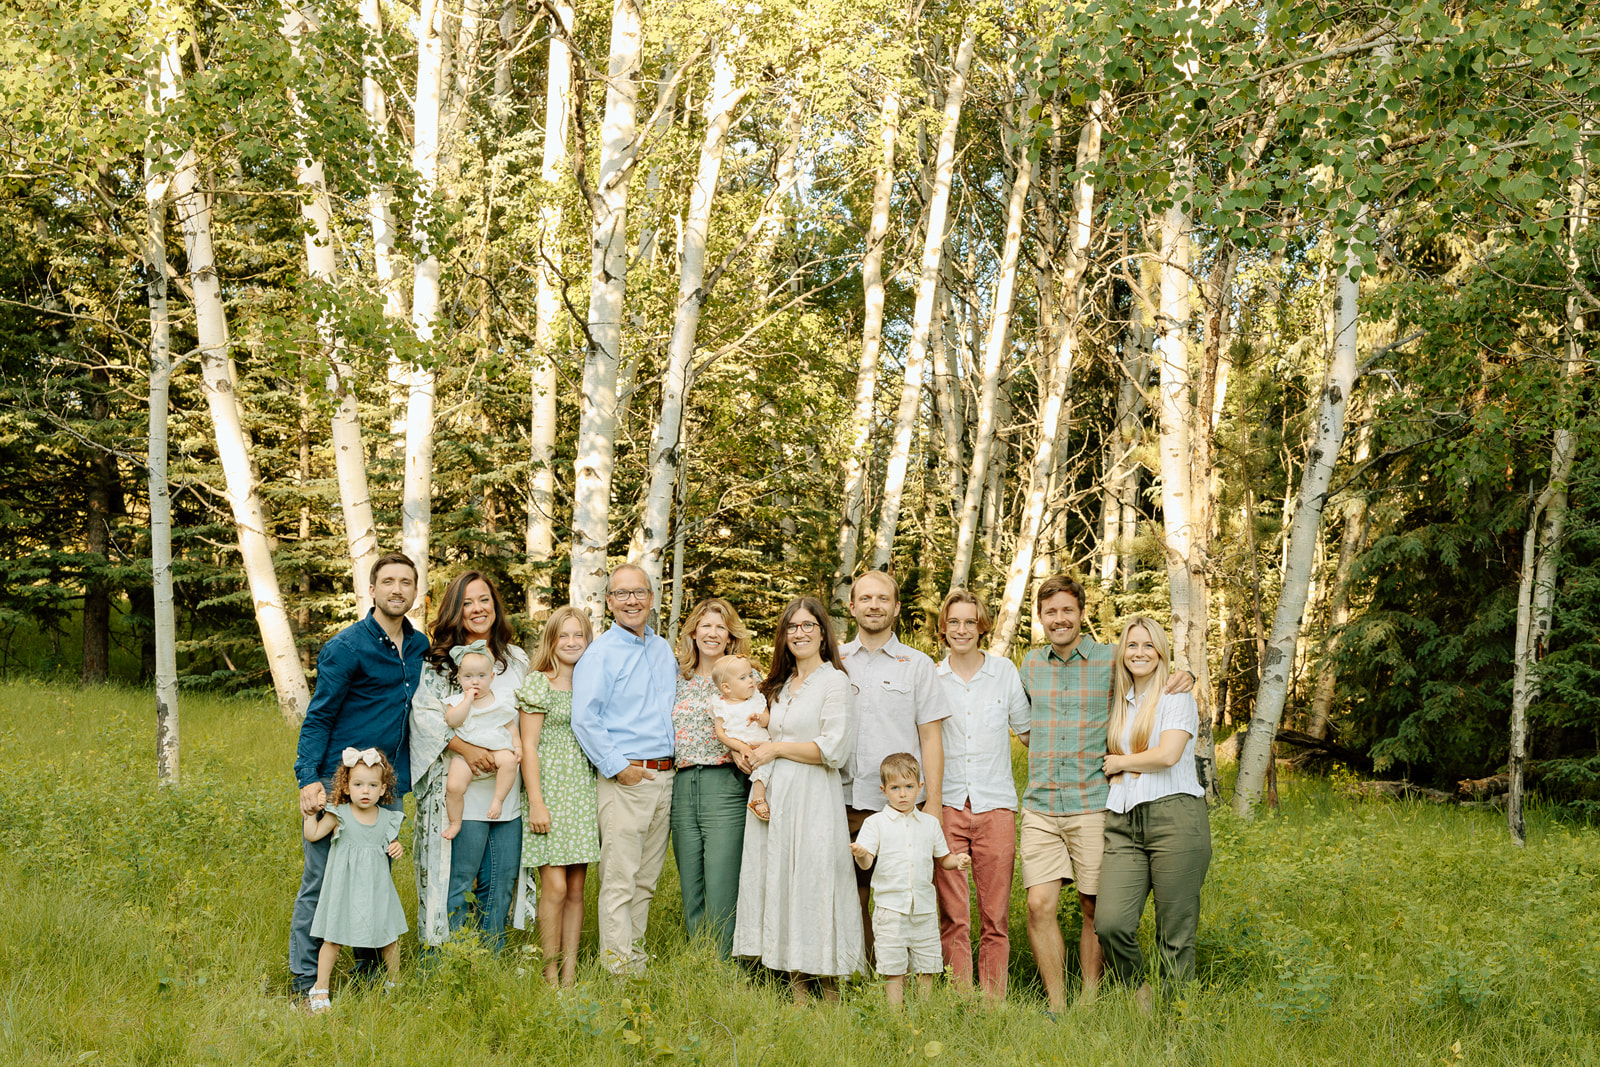 Extended family photo session near an aspen grove in the Black Hills, outside of Rapid City, SD